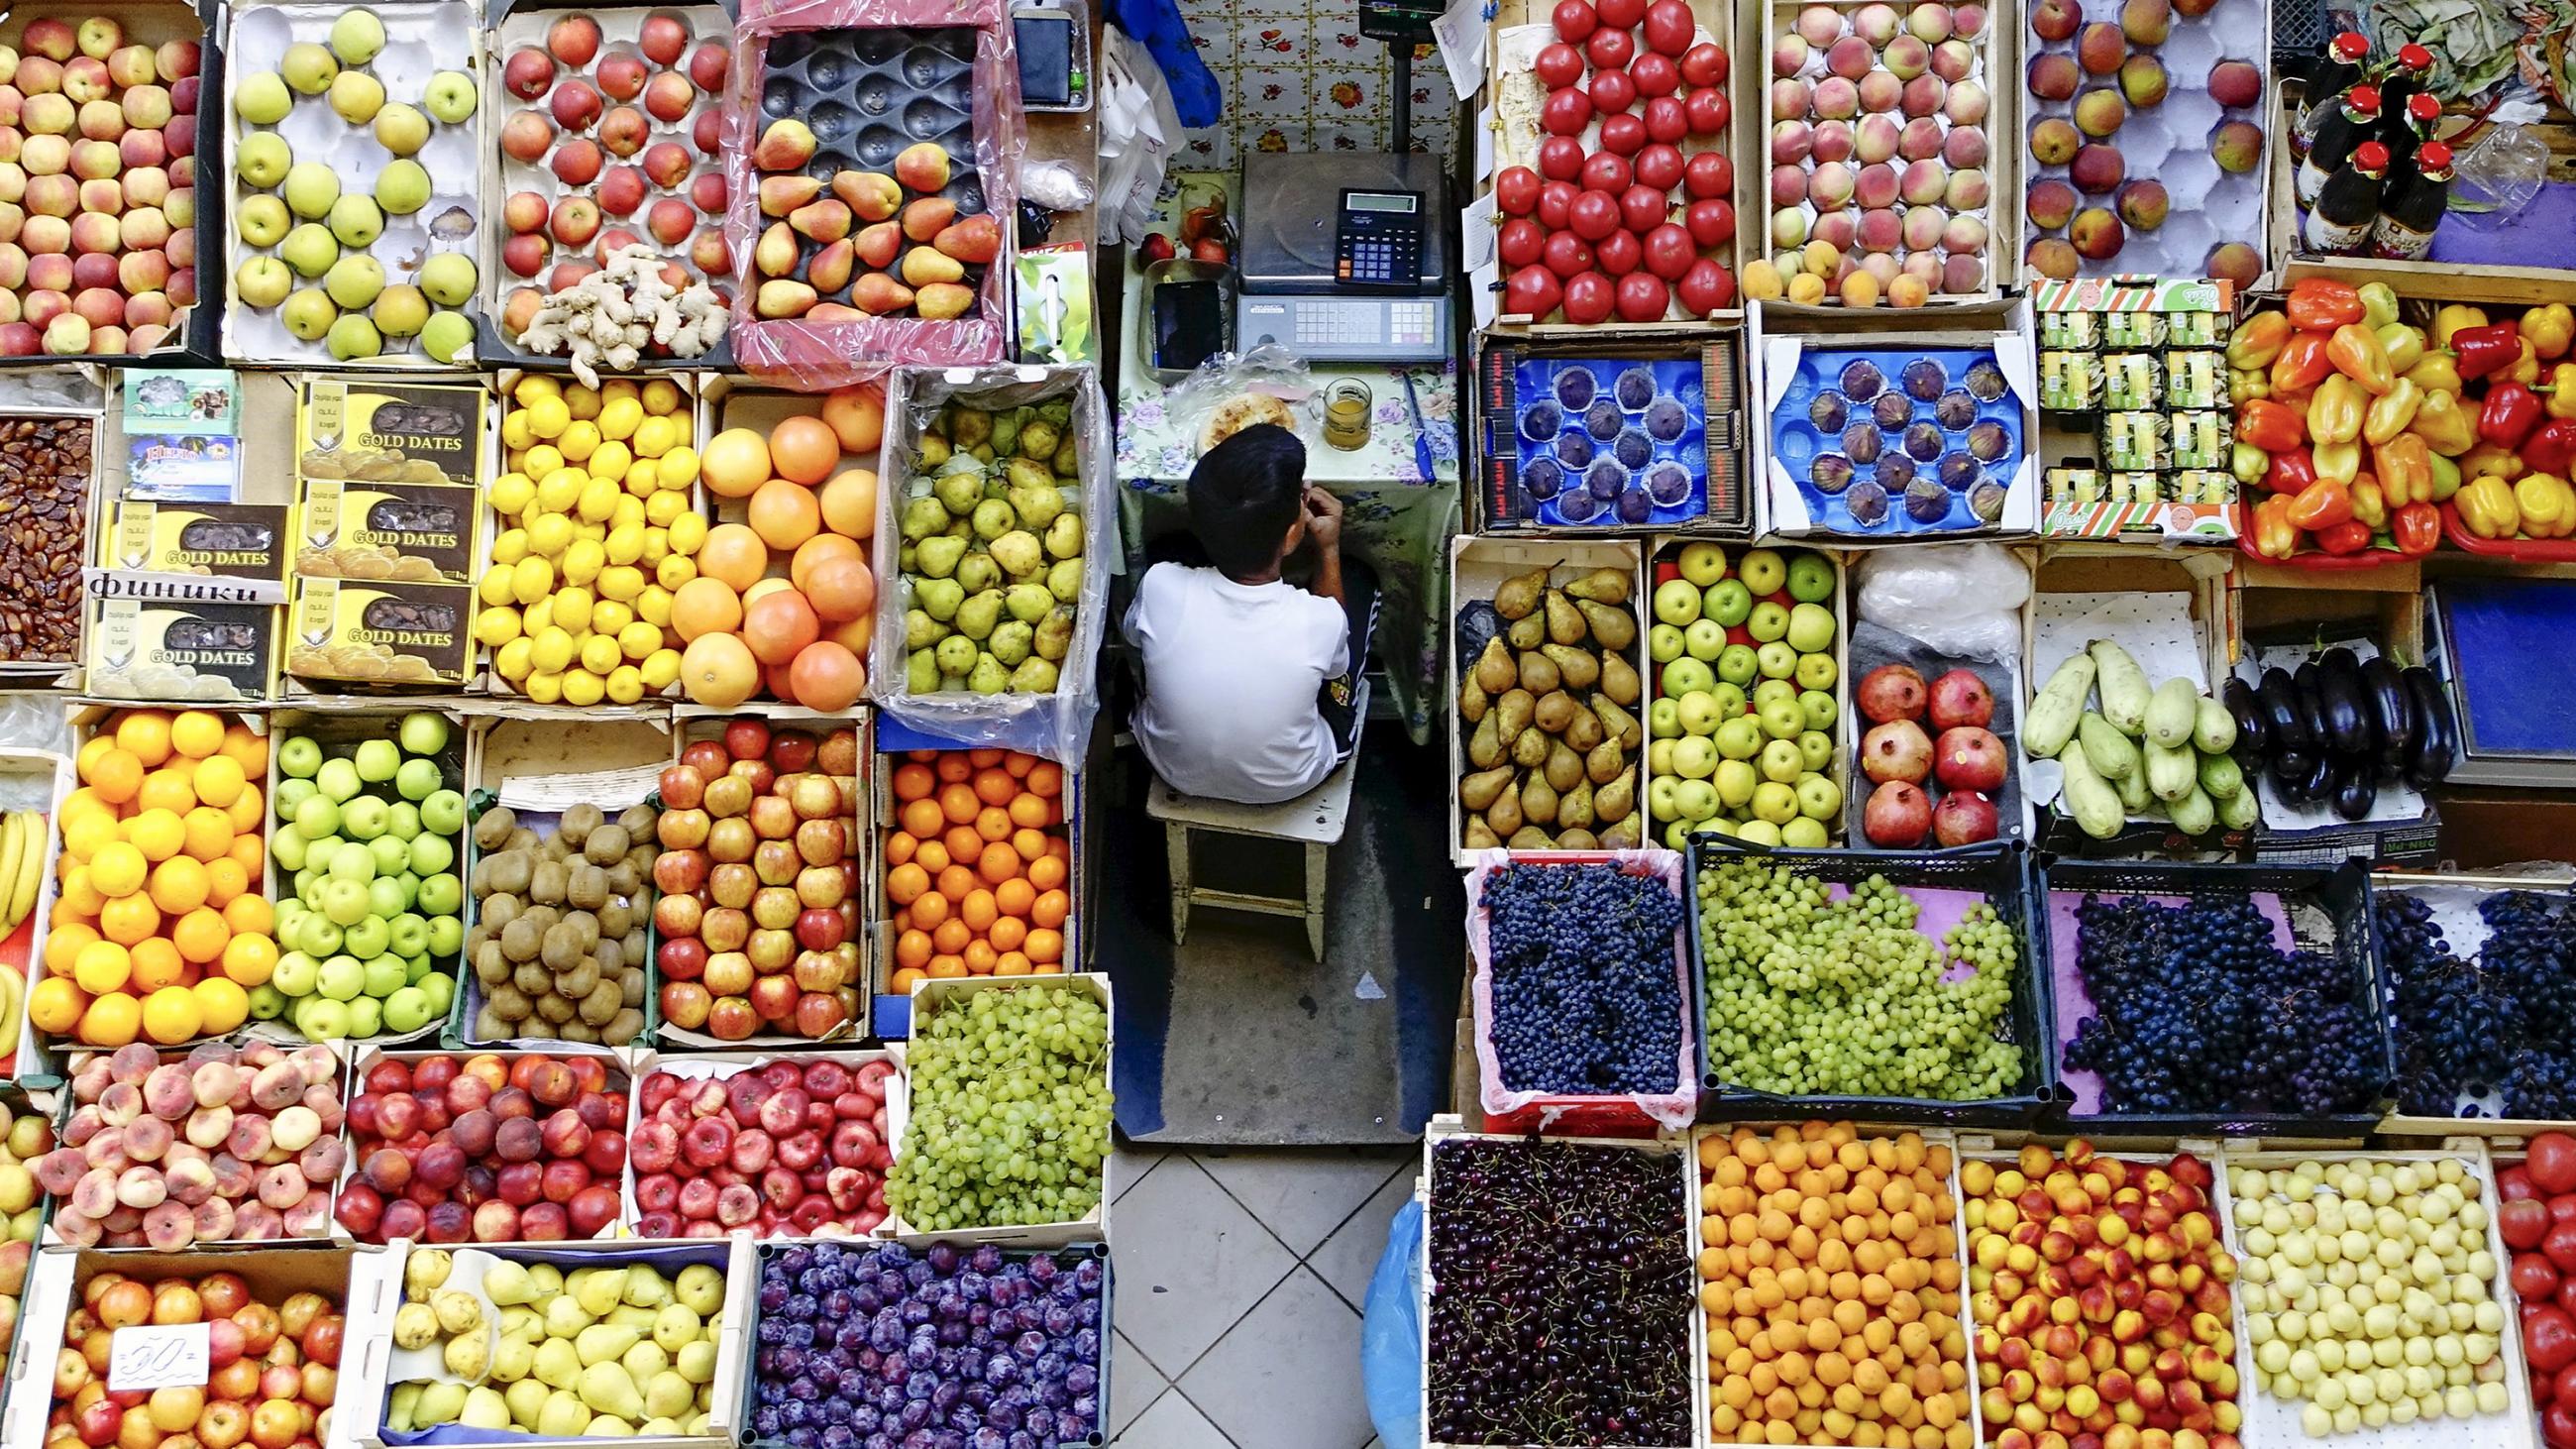 The photo shows a boy taking a break eating his lunch amid a fruit stand. 